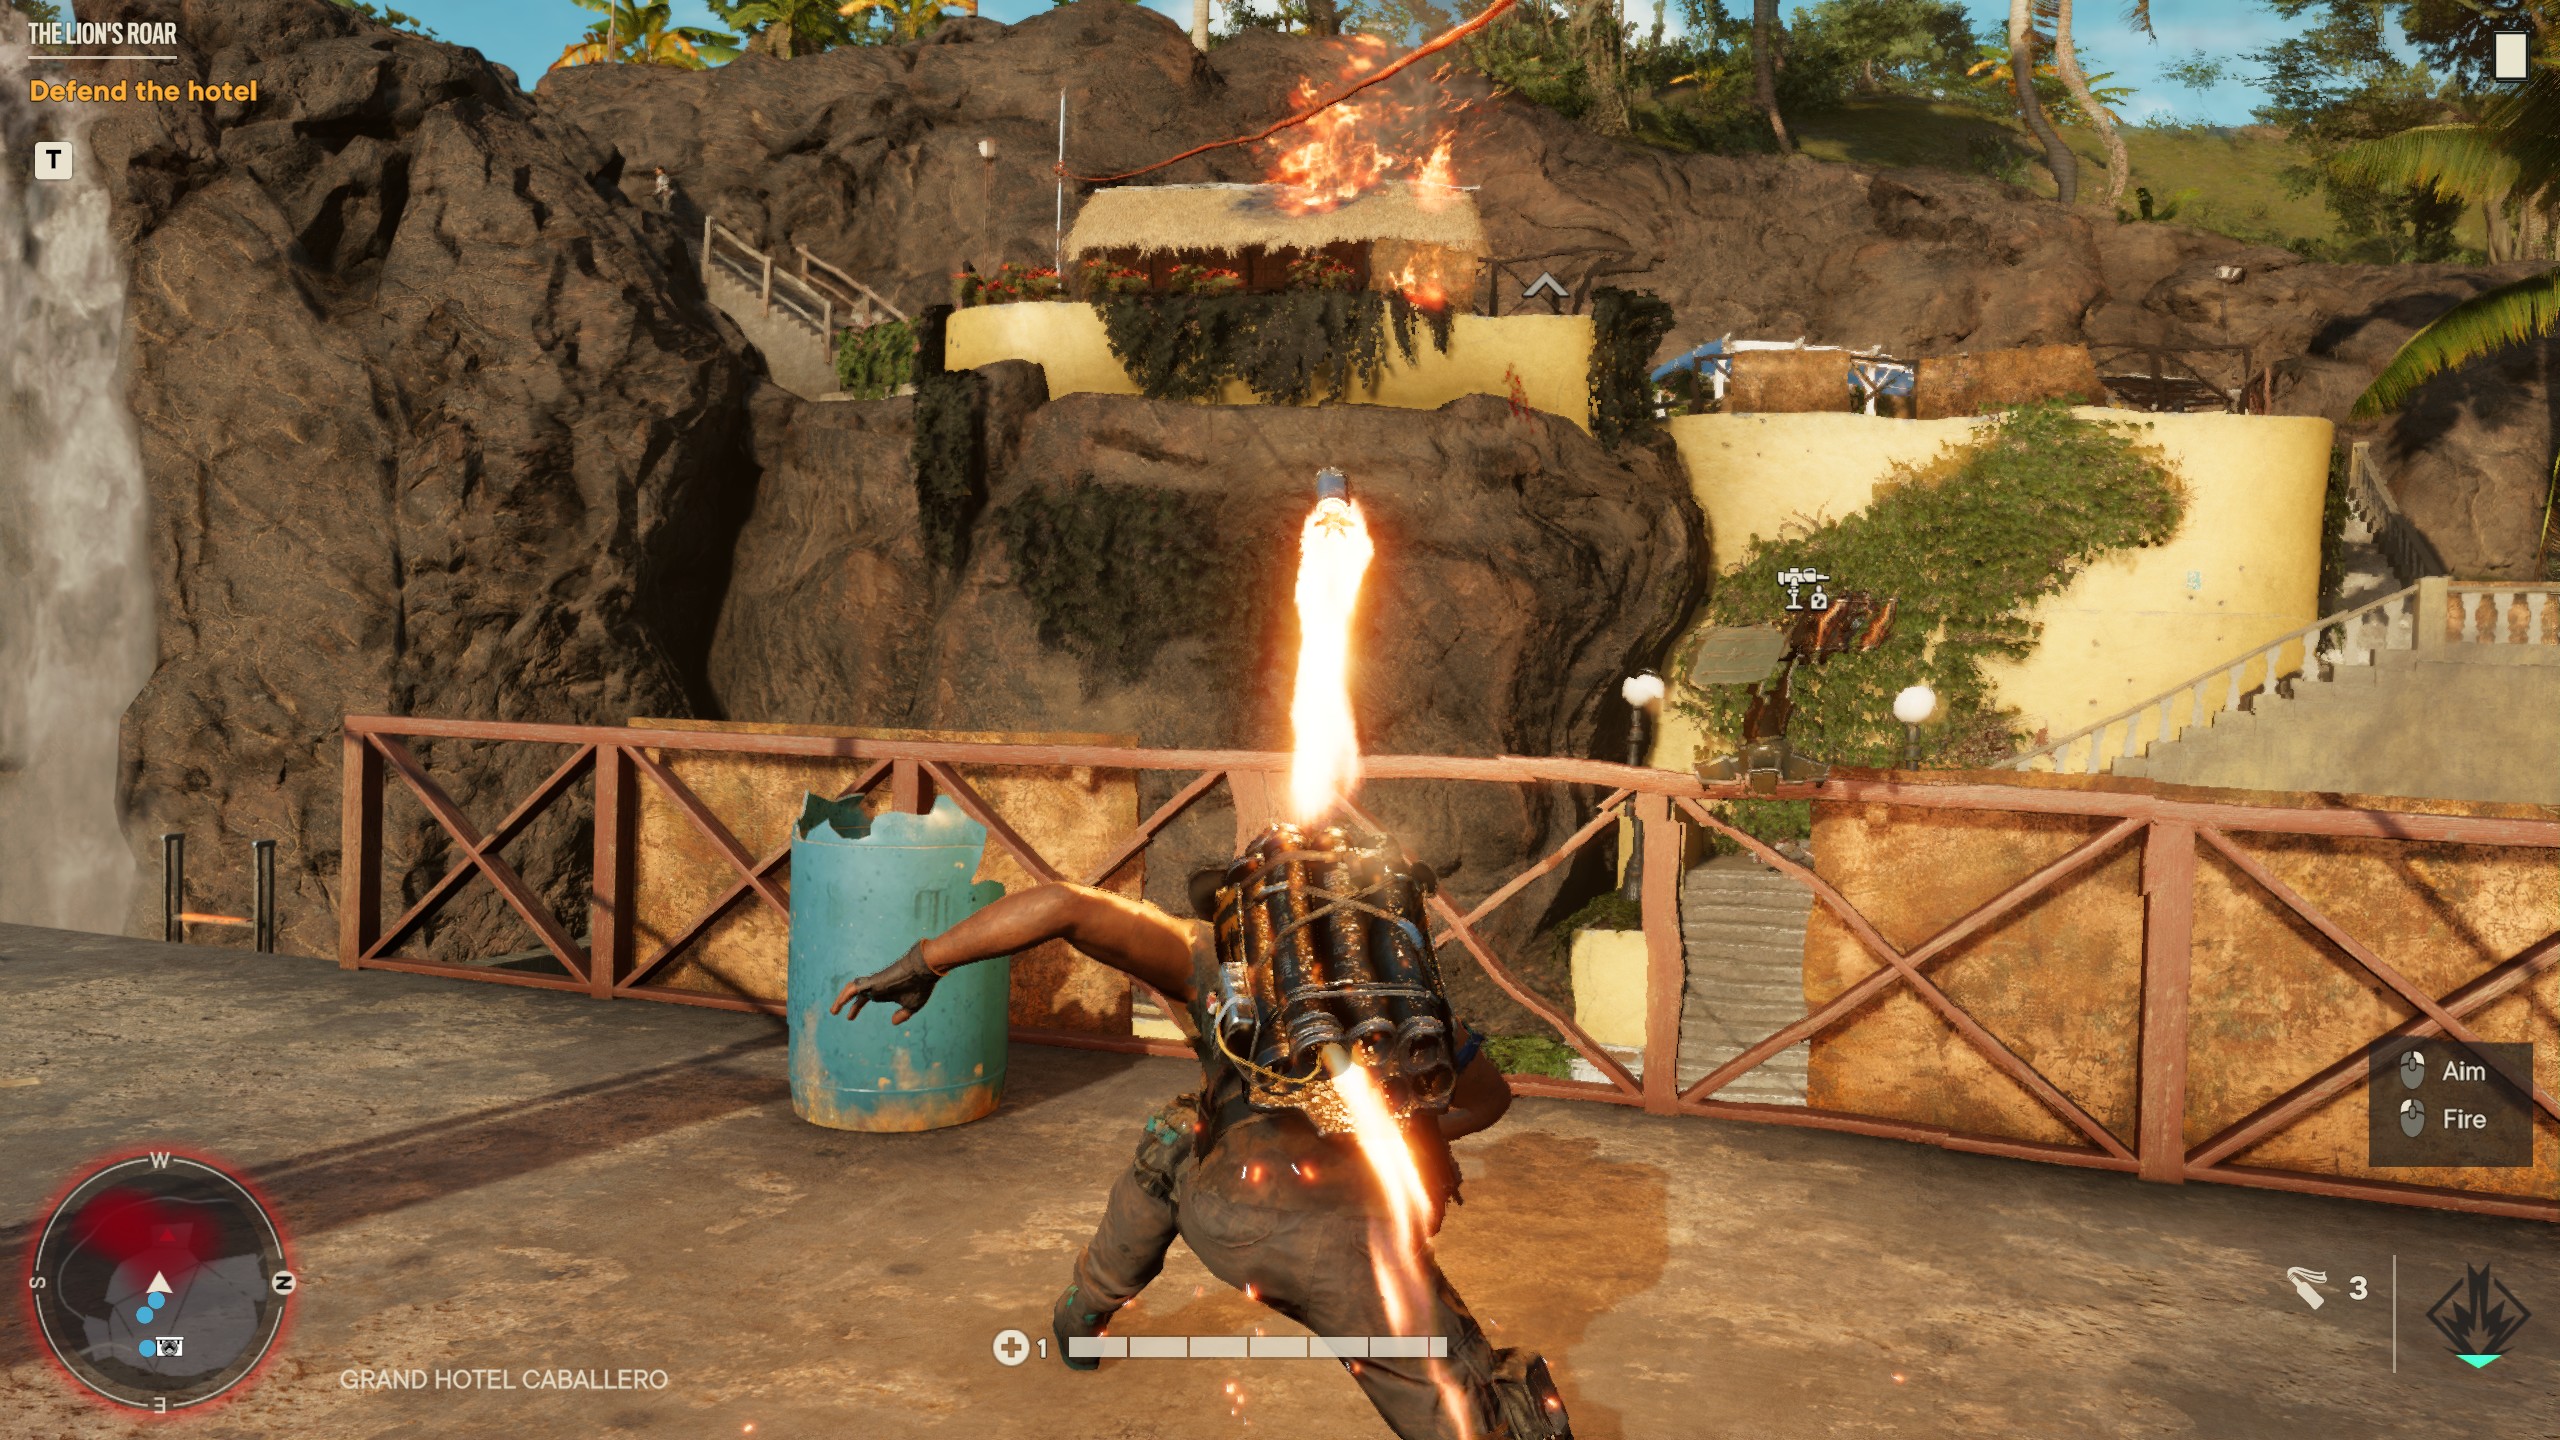 Far Cry 6 review: An action packed, exhilarating fight against tyranny